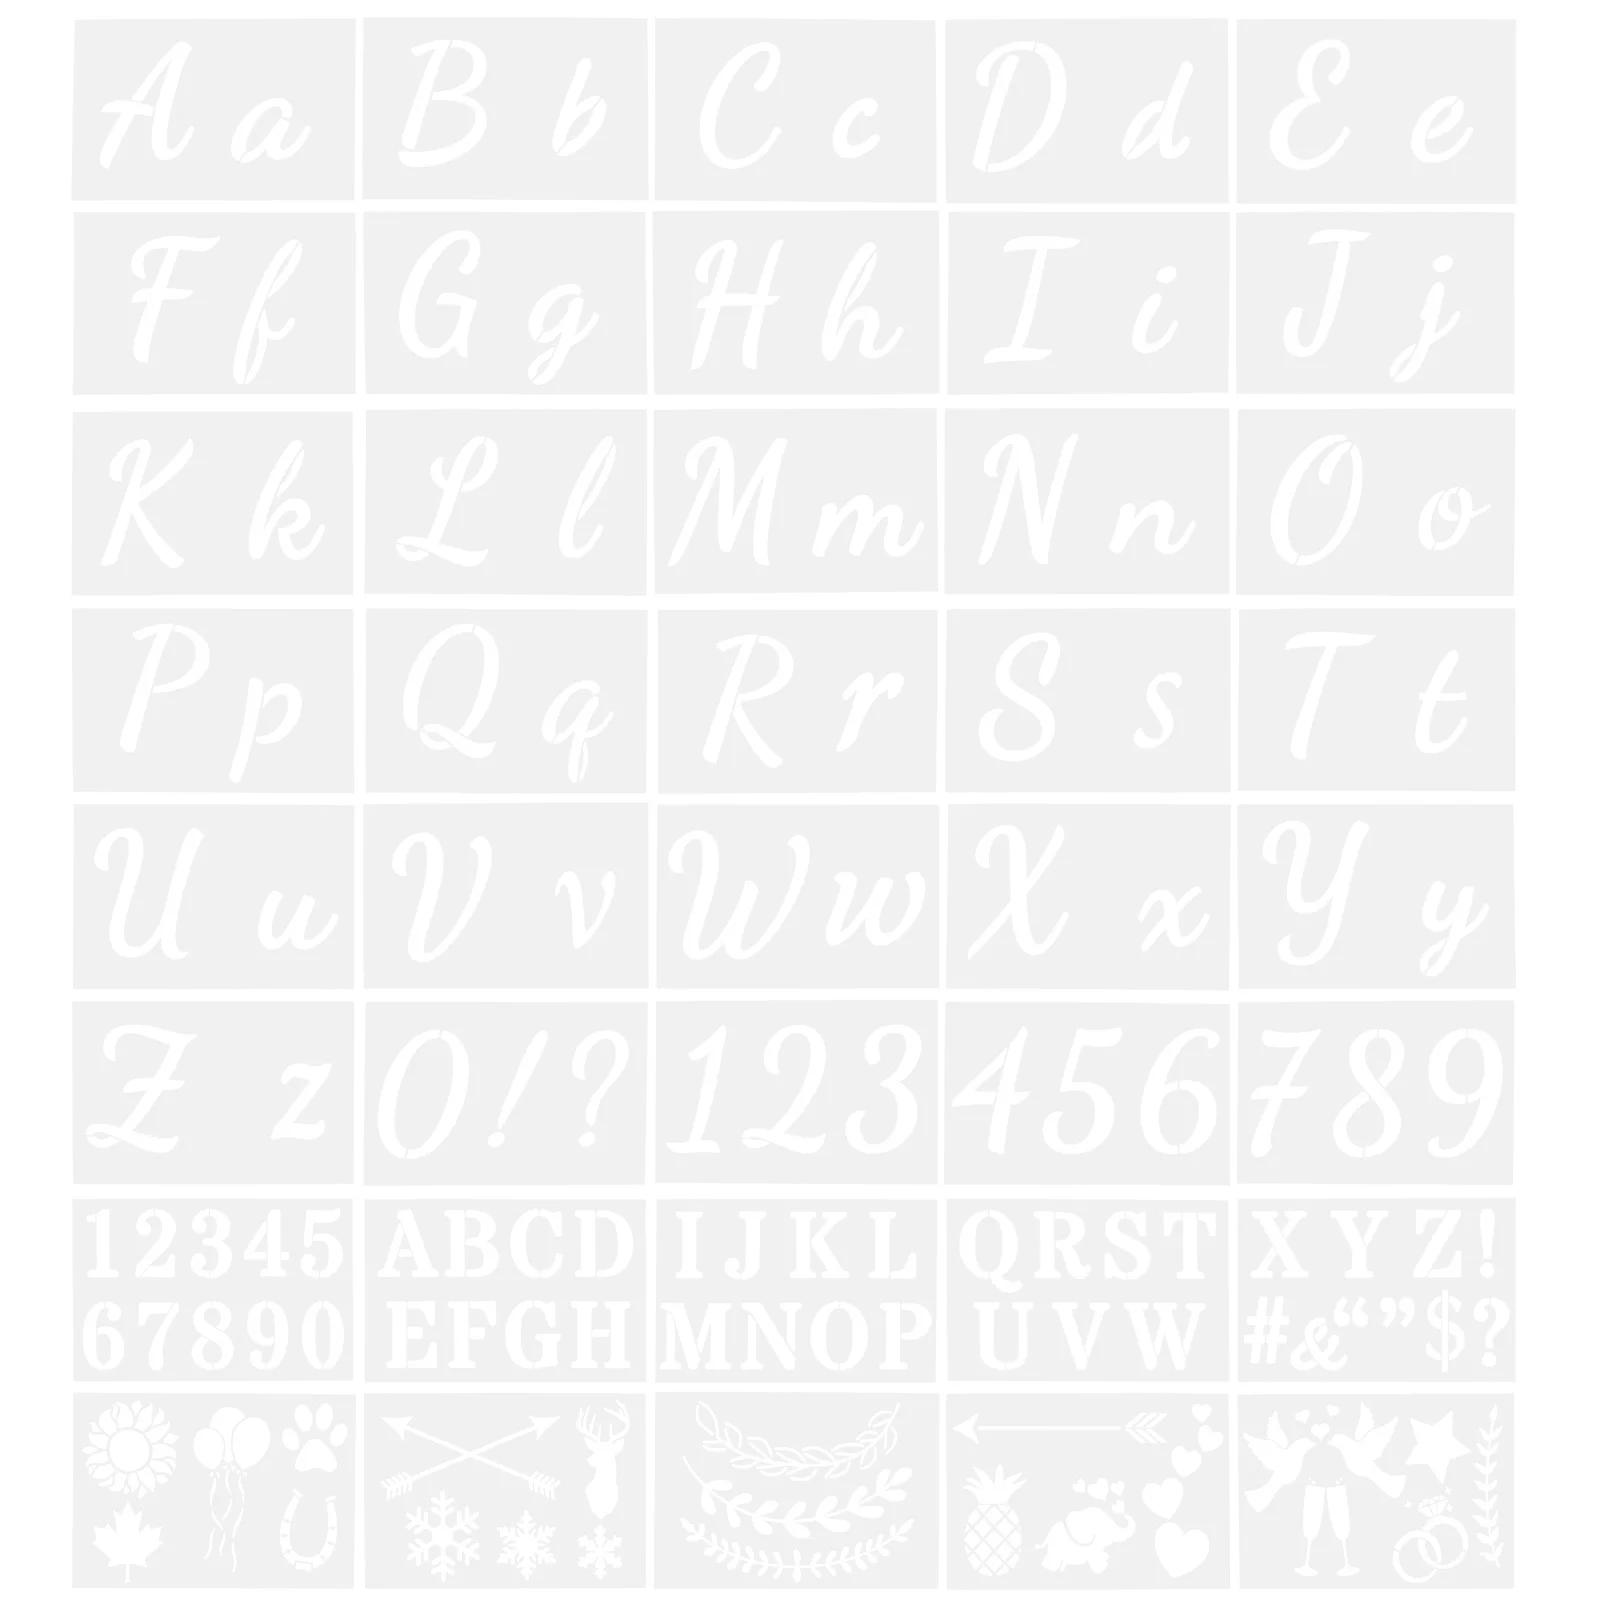 

40 Sheets Alphabet Painting Template Dies Board Decor Letter Molds Large Stencil Letters Multifunction Small Stencils